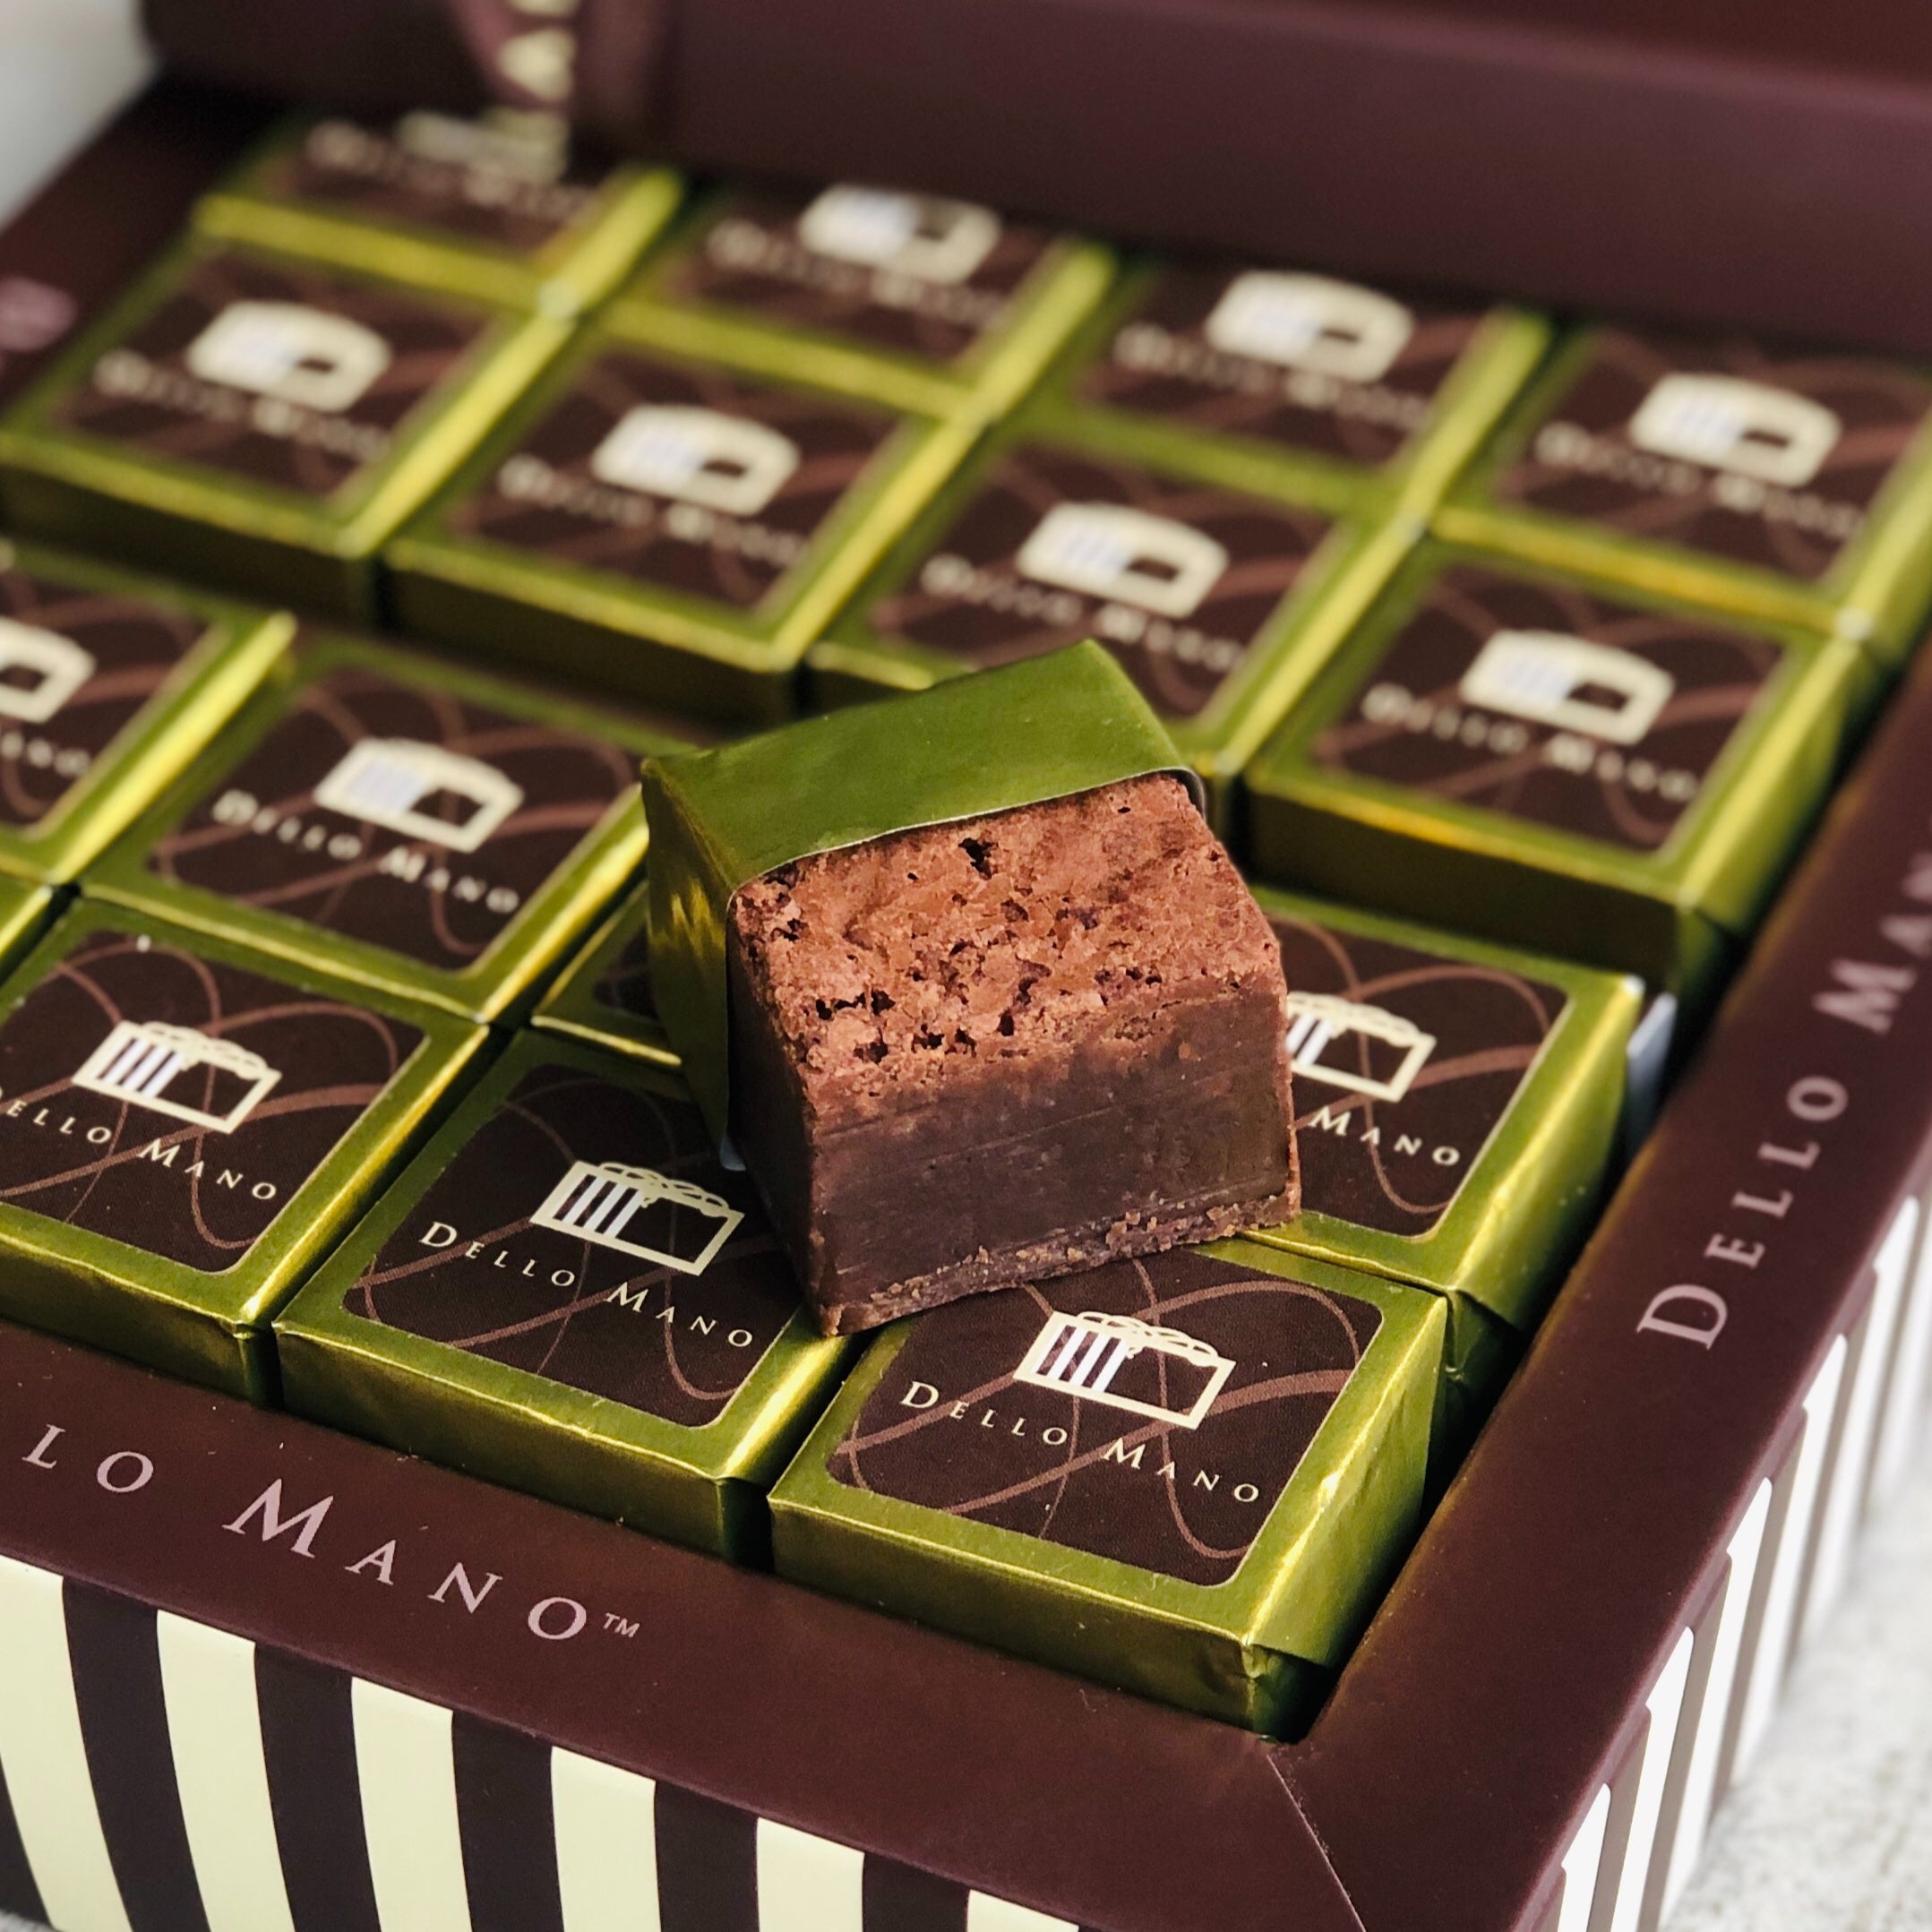 An open chocolate gift box of gold individually wrapped Brownie cubes. The box has words saying Dello Mano and there is an open foil brownie on top of the box.